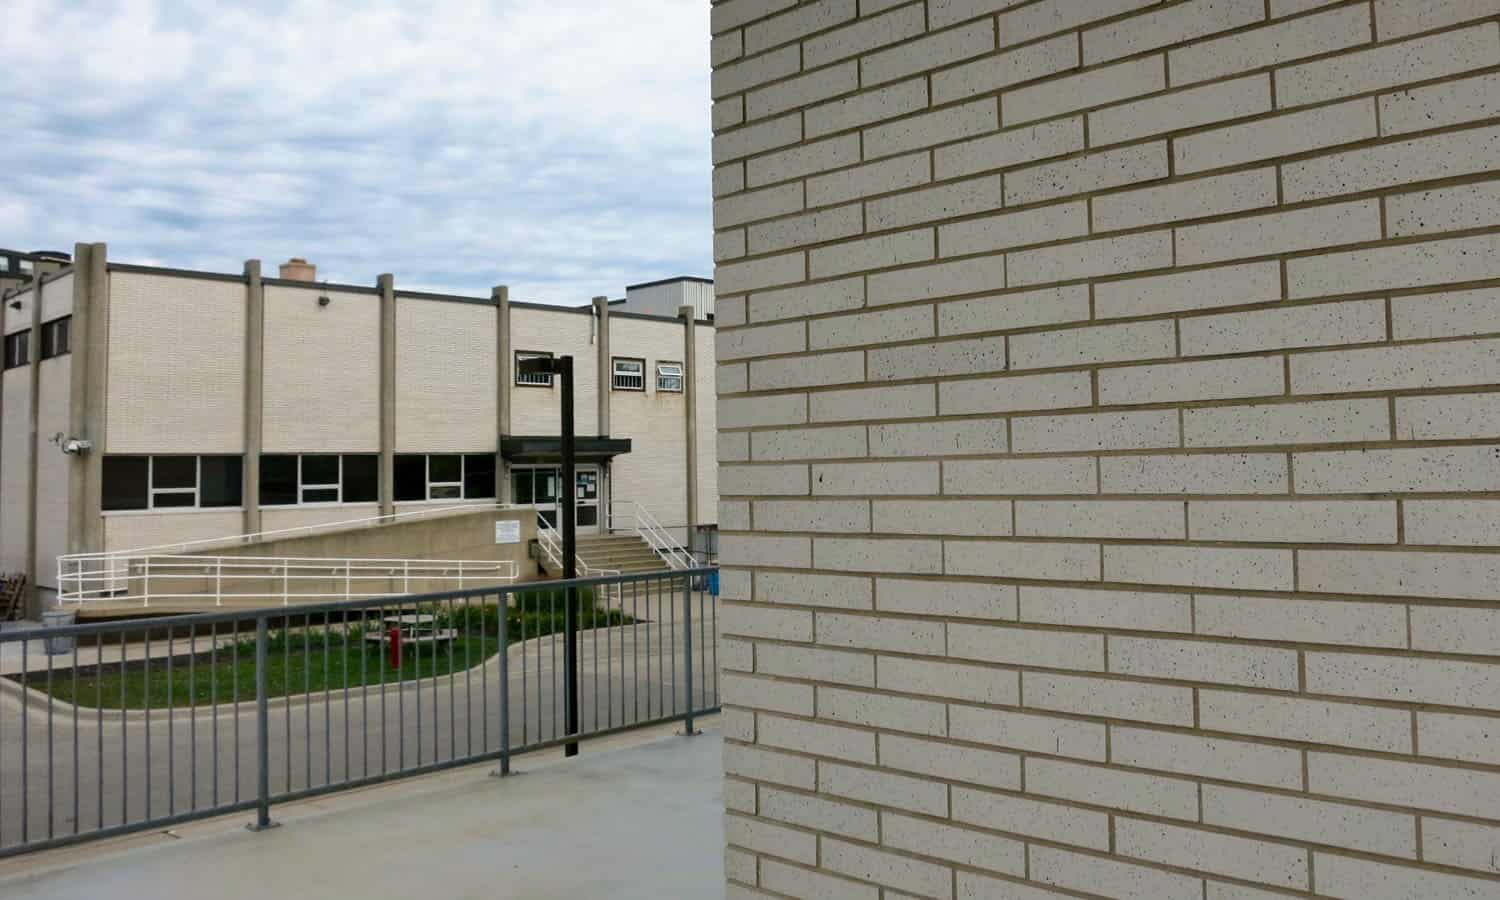 The jail as viewed from the podium of the justice building